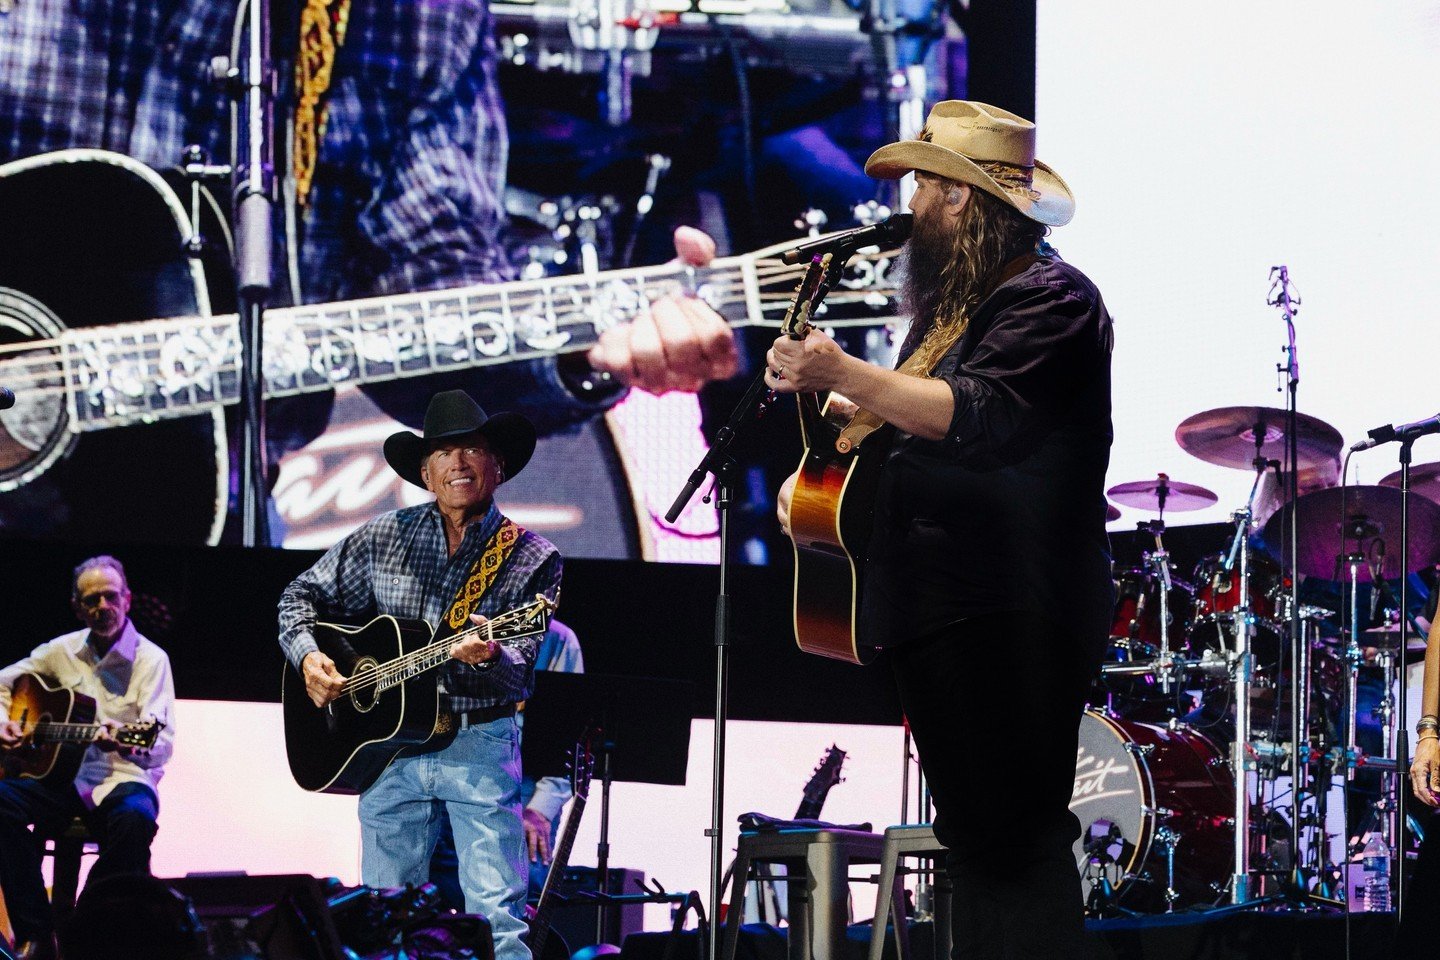 Are you ready for tonight?? George Strait kicks off in a just a few hours with special guests Chris Stapleton and Little Big Town! 🤠 What songs do you want to hear? ⬇️ Last chance for tickets, link in our story!

Photo: Andy Barron